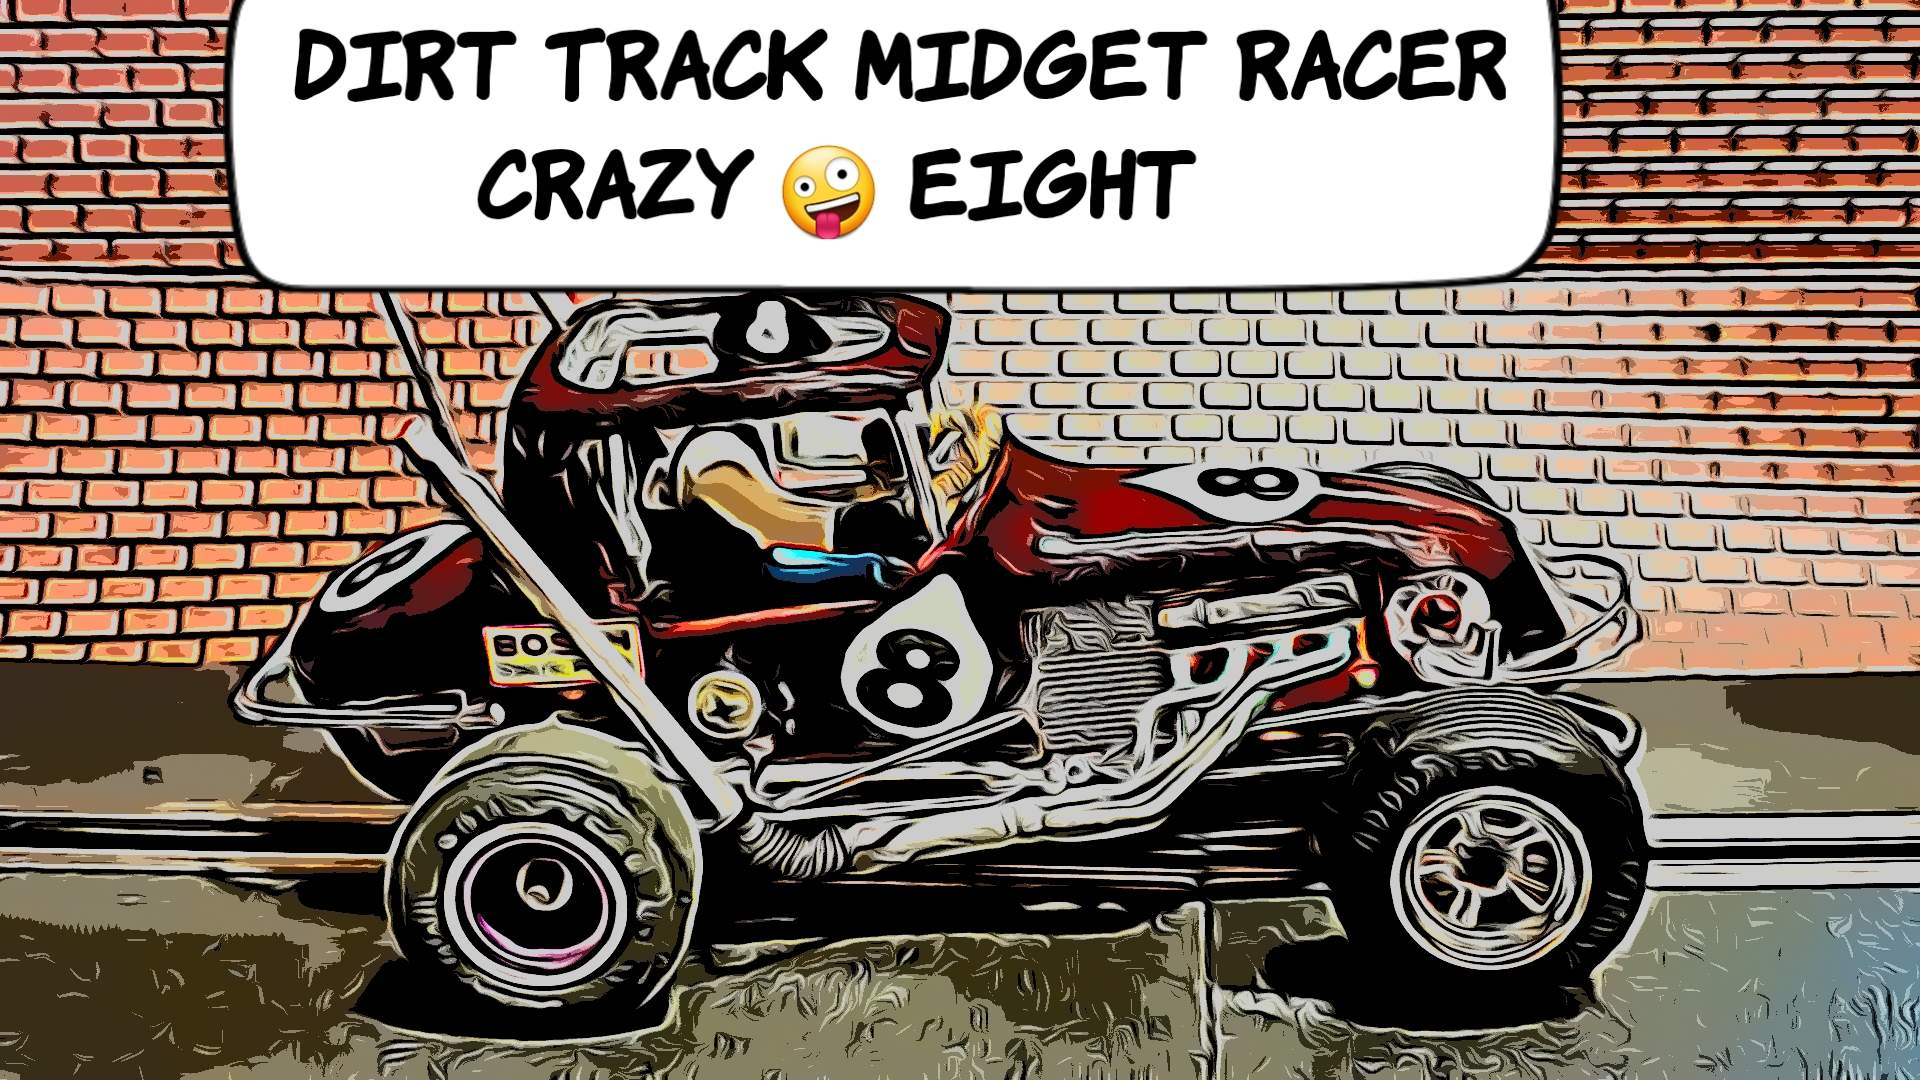 *Sale*, Sprint Cup Style *, Save $$ off our Ebay $369.99 Store Sale Price * Monogram Dirt Track Midget Racing Special Slot Car 1/24 Scale Car – Crazy 🤪 8 🤪